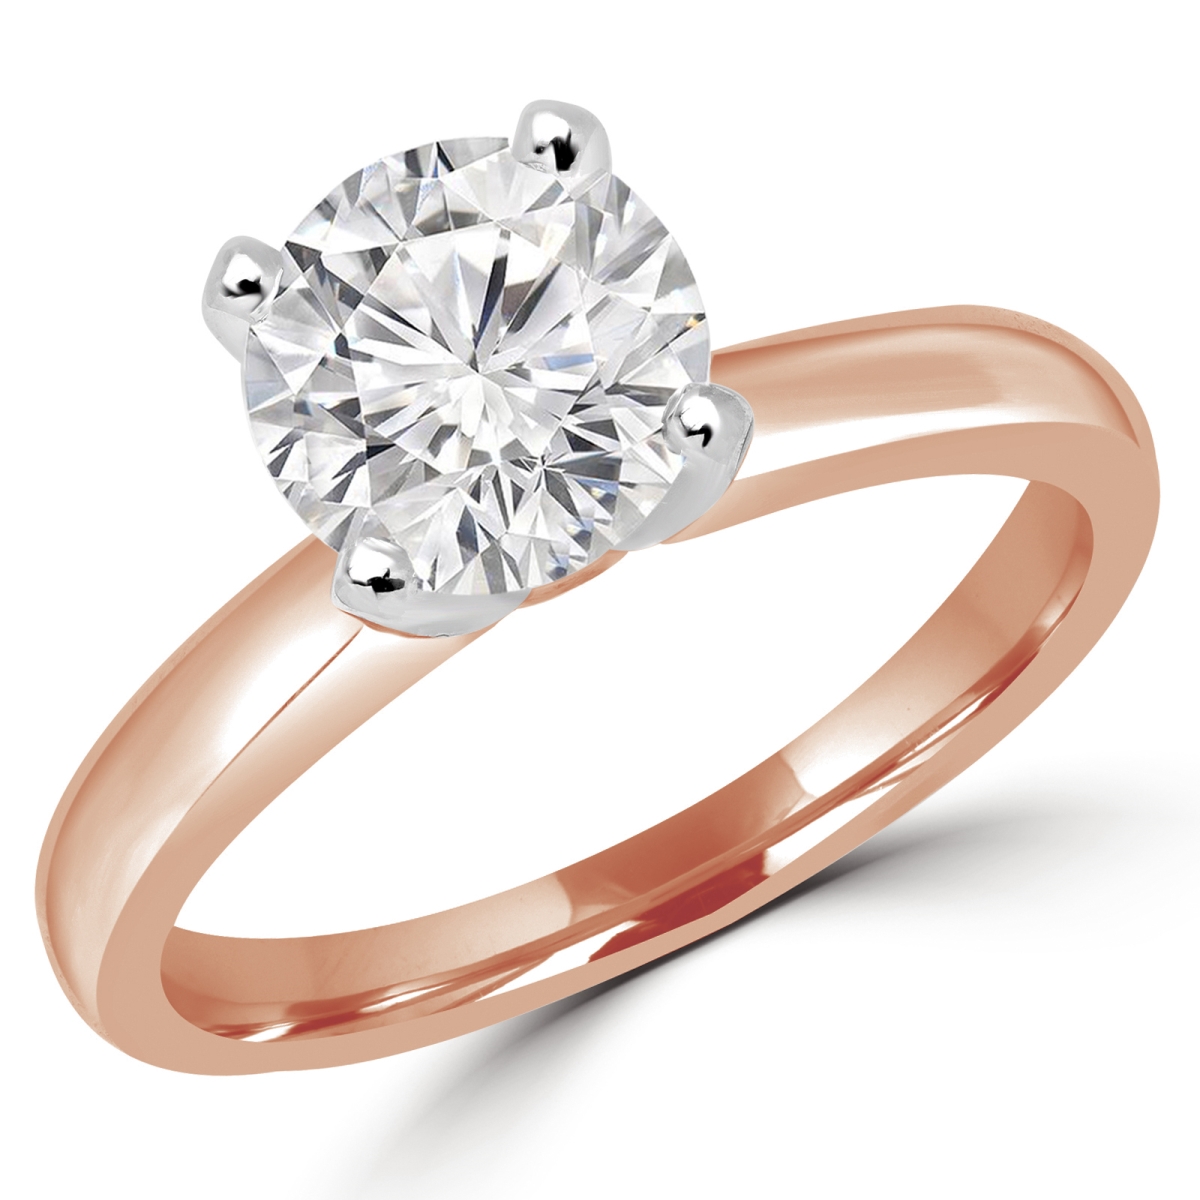 Picture of Majesty Diamonds MD180009-5.75 0.6 CT Round Diamond Solitaire Engagement Ring in 14K Rose Gold - Size 5.75